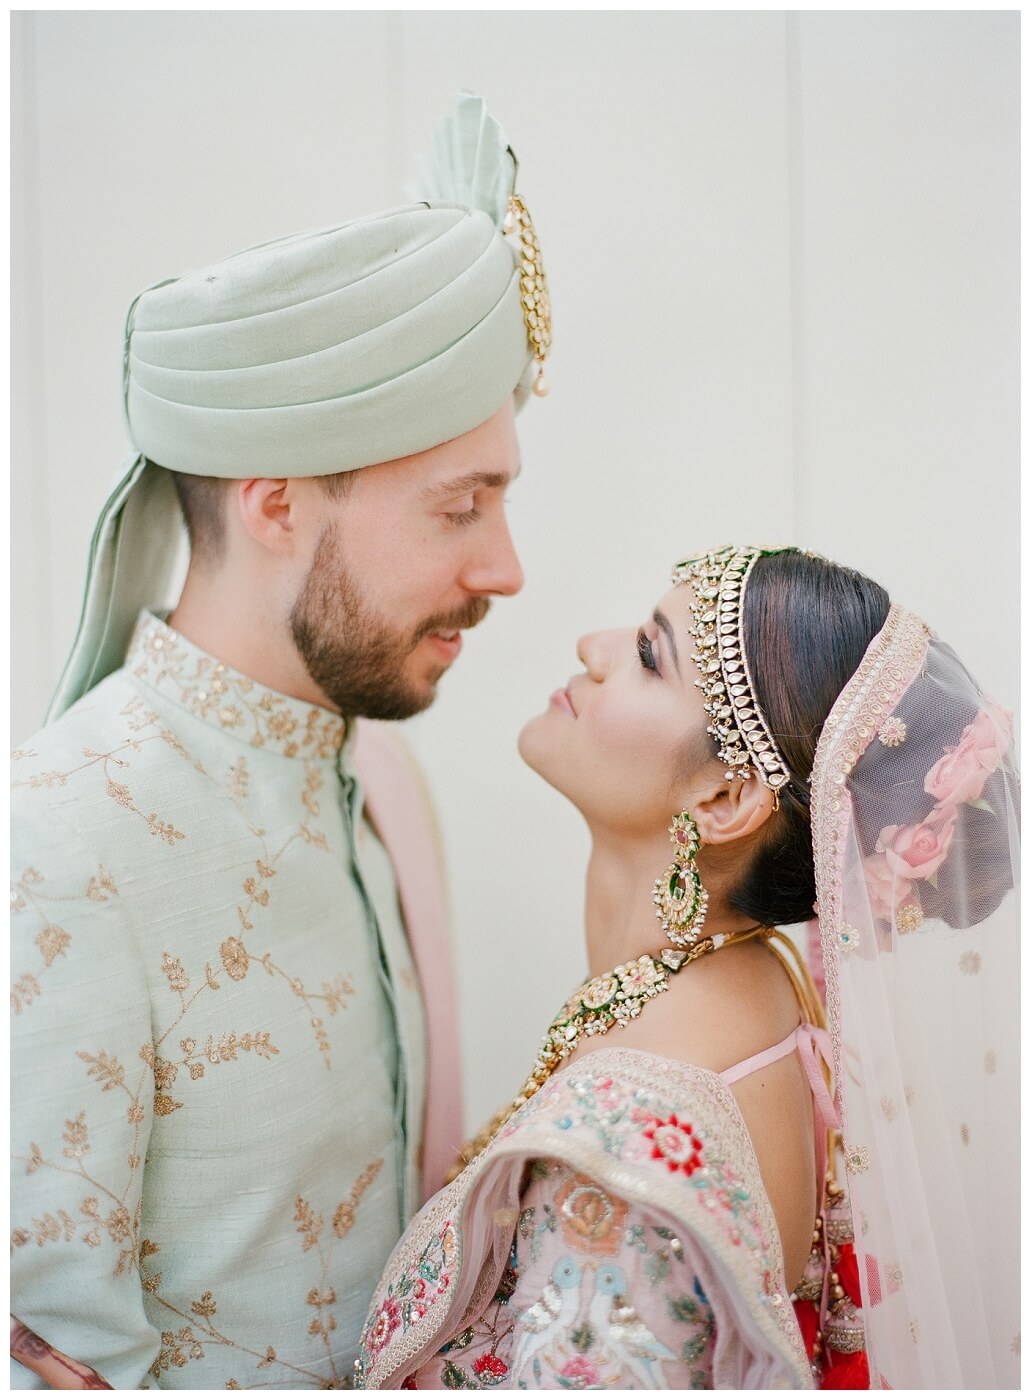 San Diego Indian Wedding Photographer multi day event baraat and sangeet